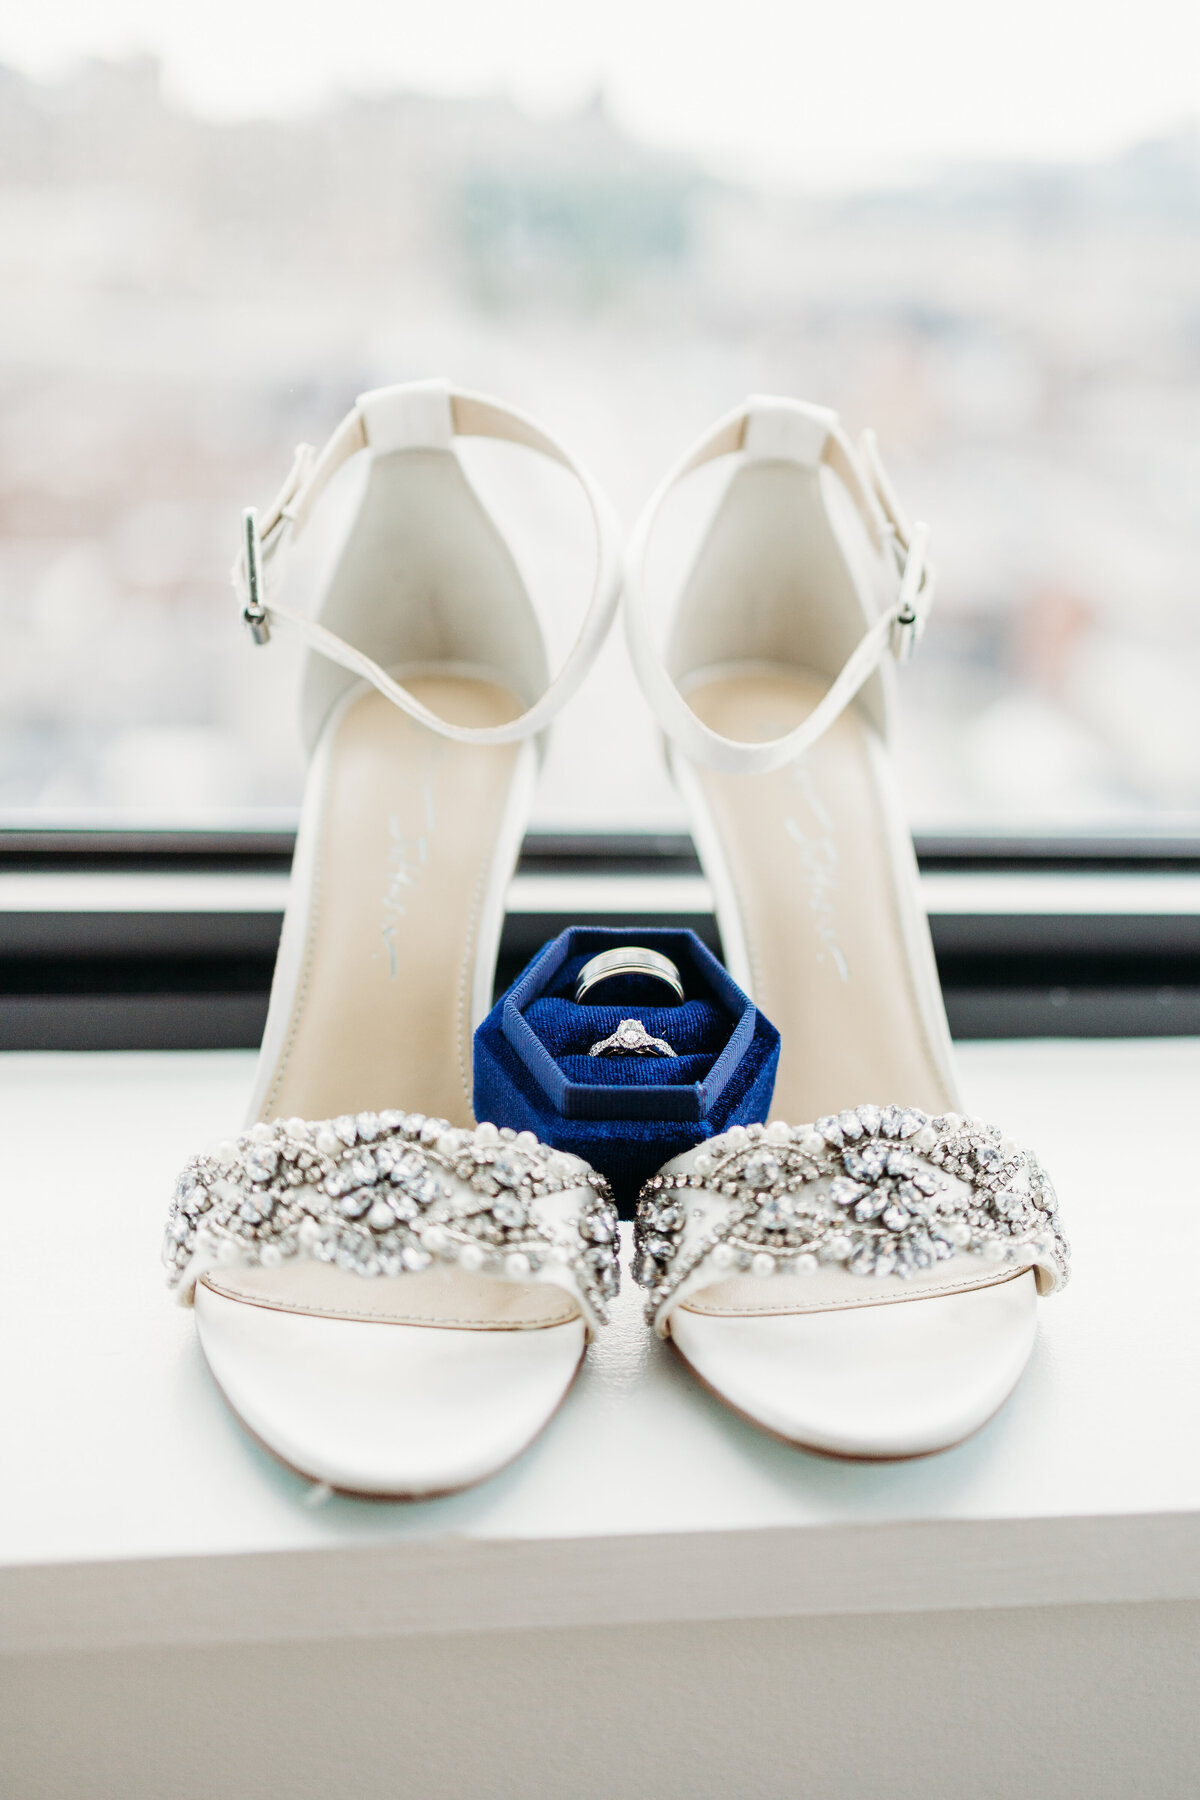 Wedding shoes and details